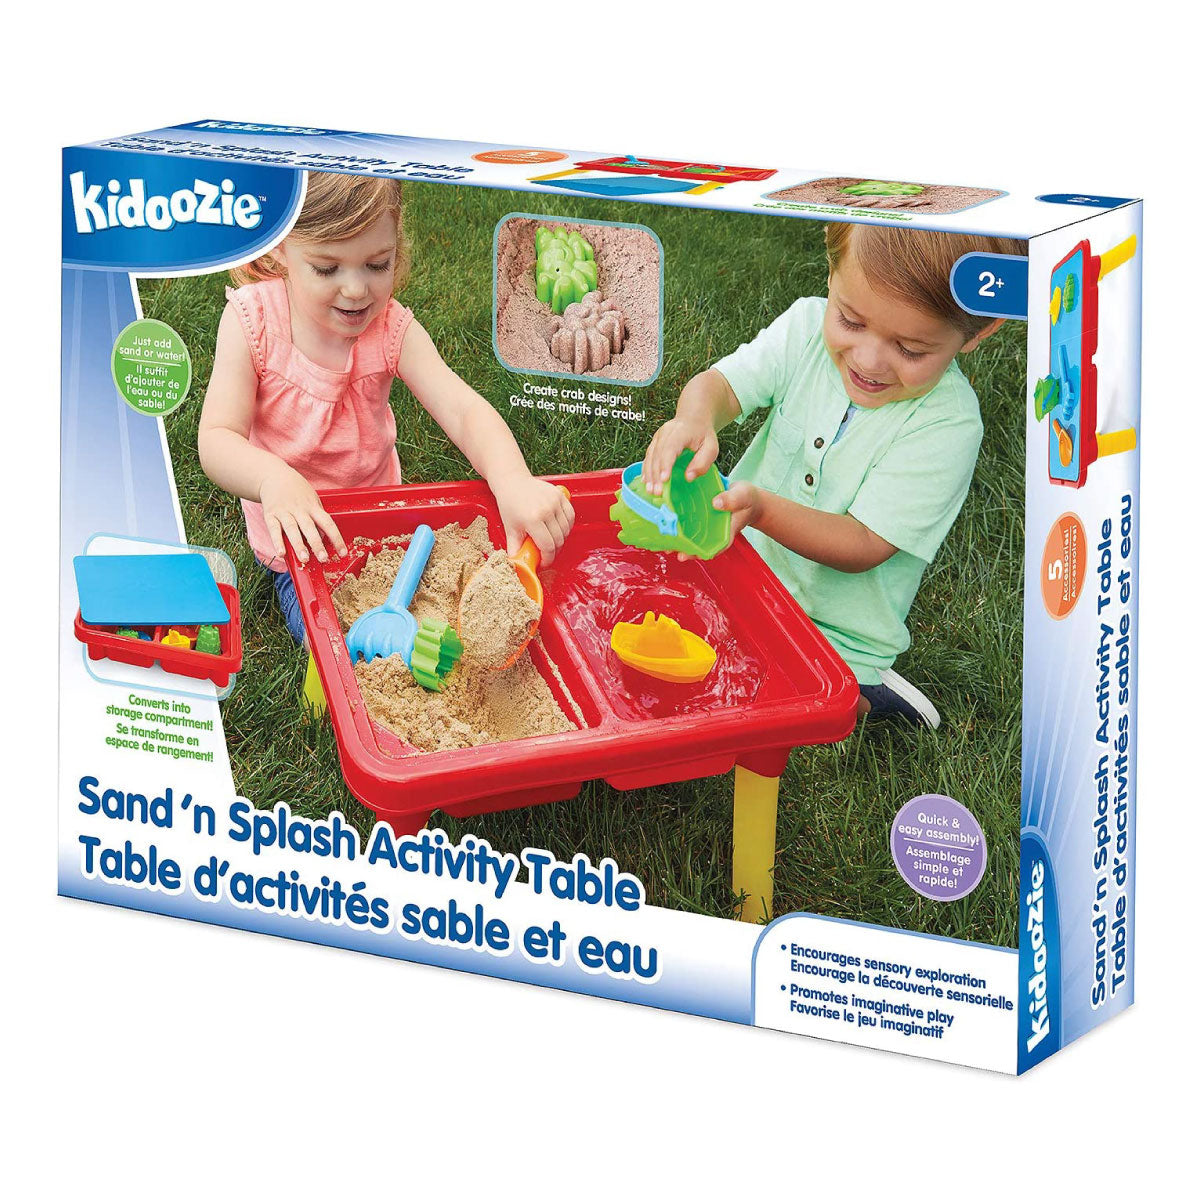 Sand n’ Splash Activity Table from Kidoozie